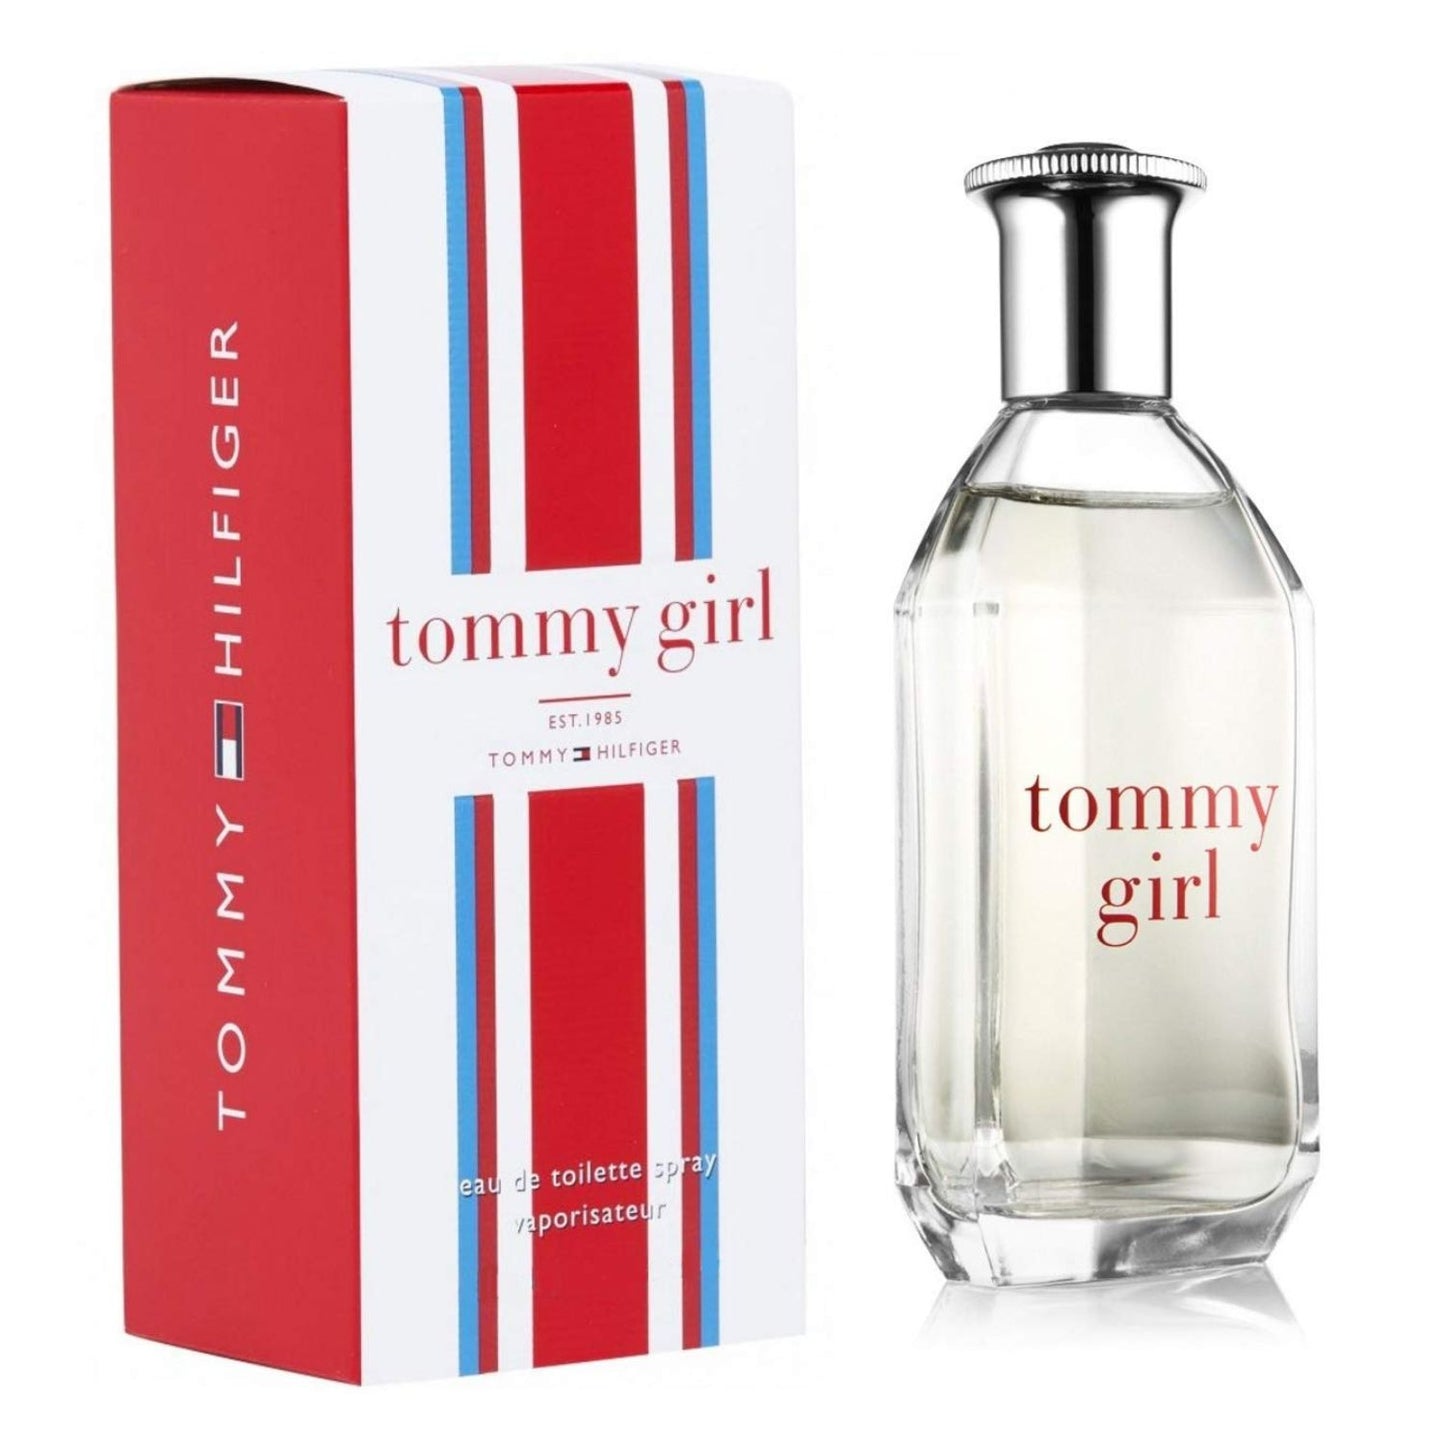 Colonia Tommy Hilfiger Tommy Girl Eau de Toilette (EDT) 100 ml para mujer